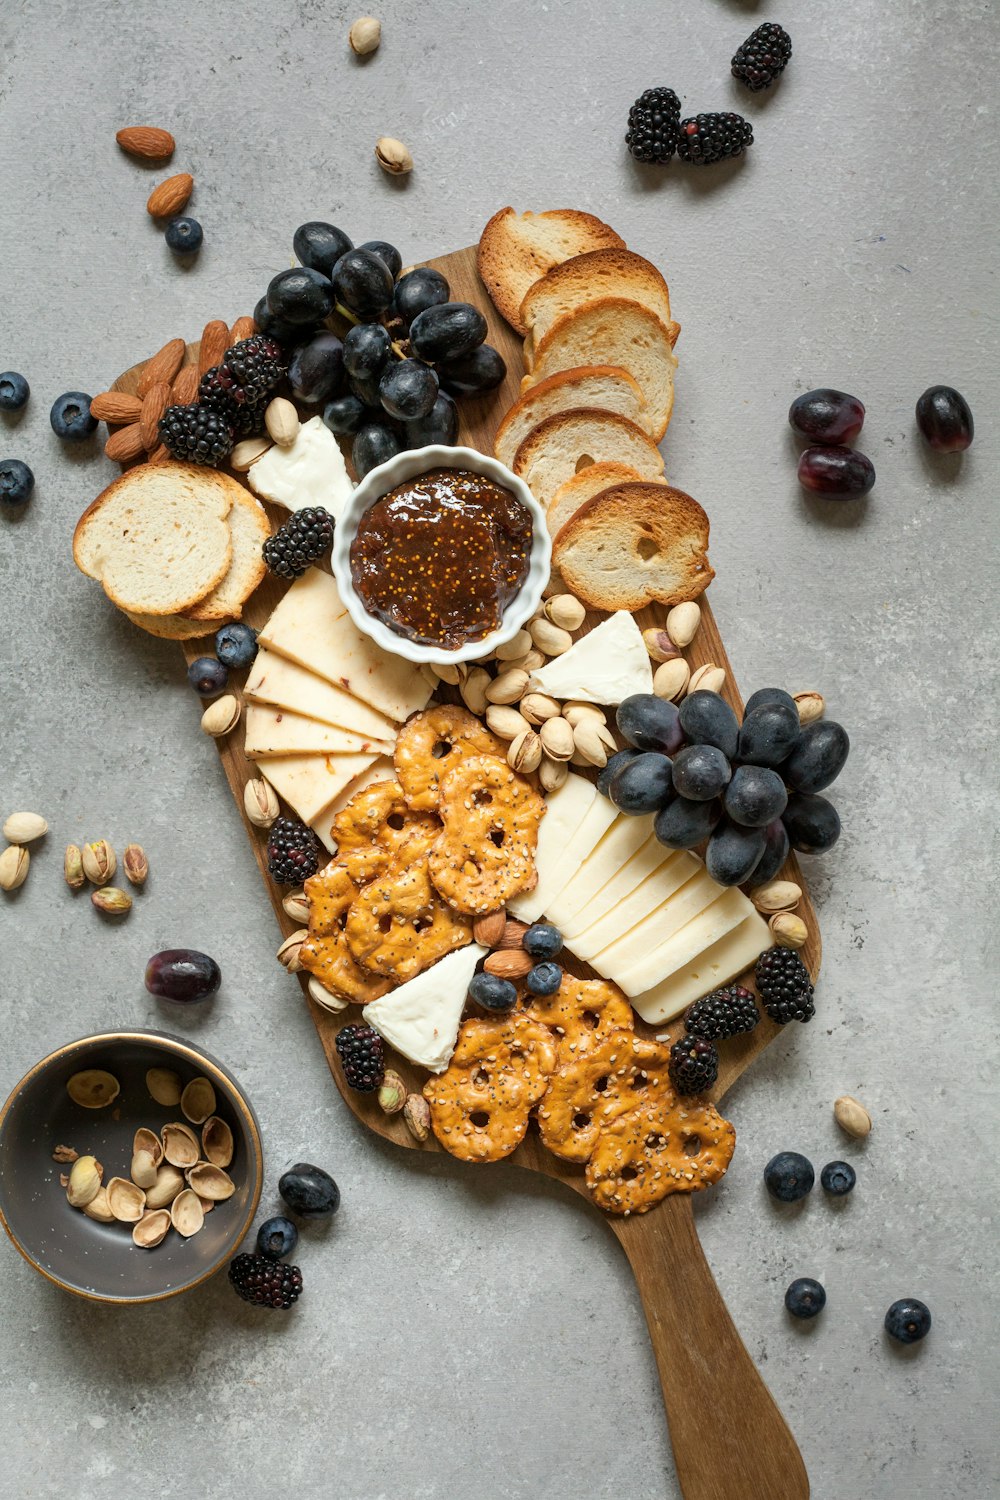 baked breads and cookies on brown wooden board